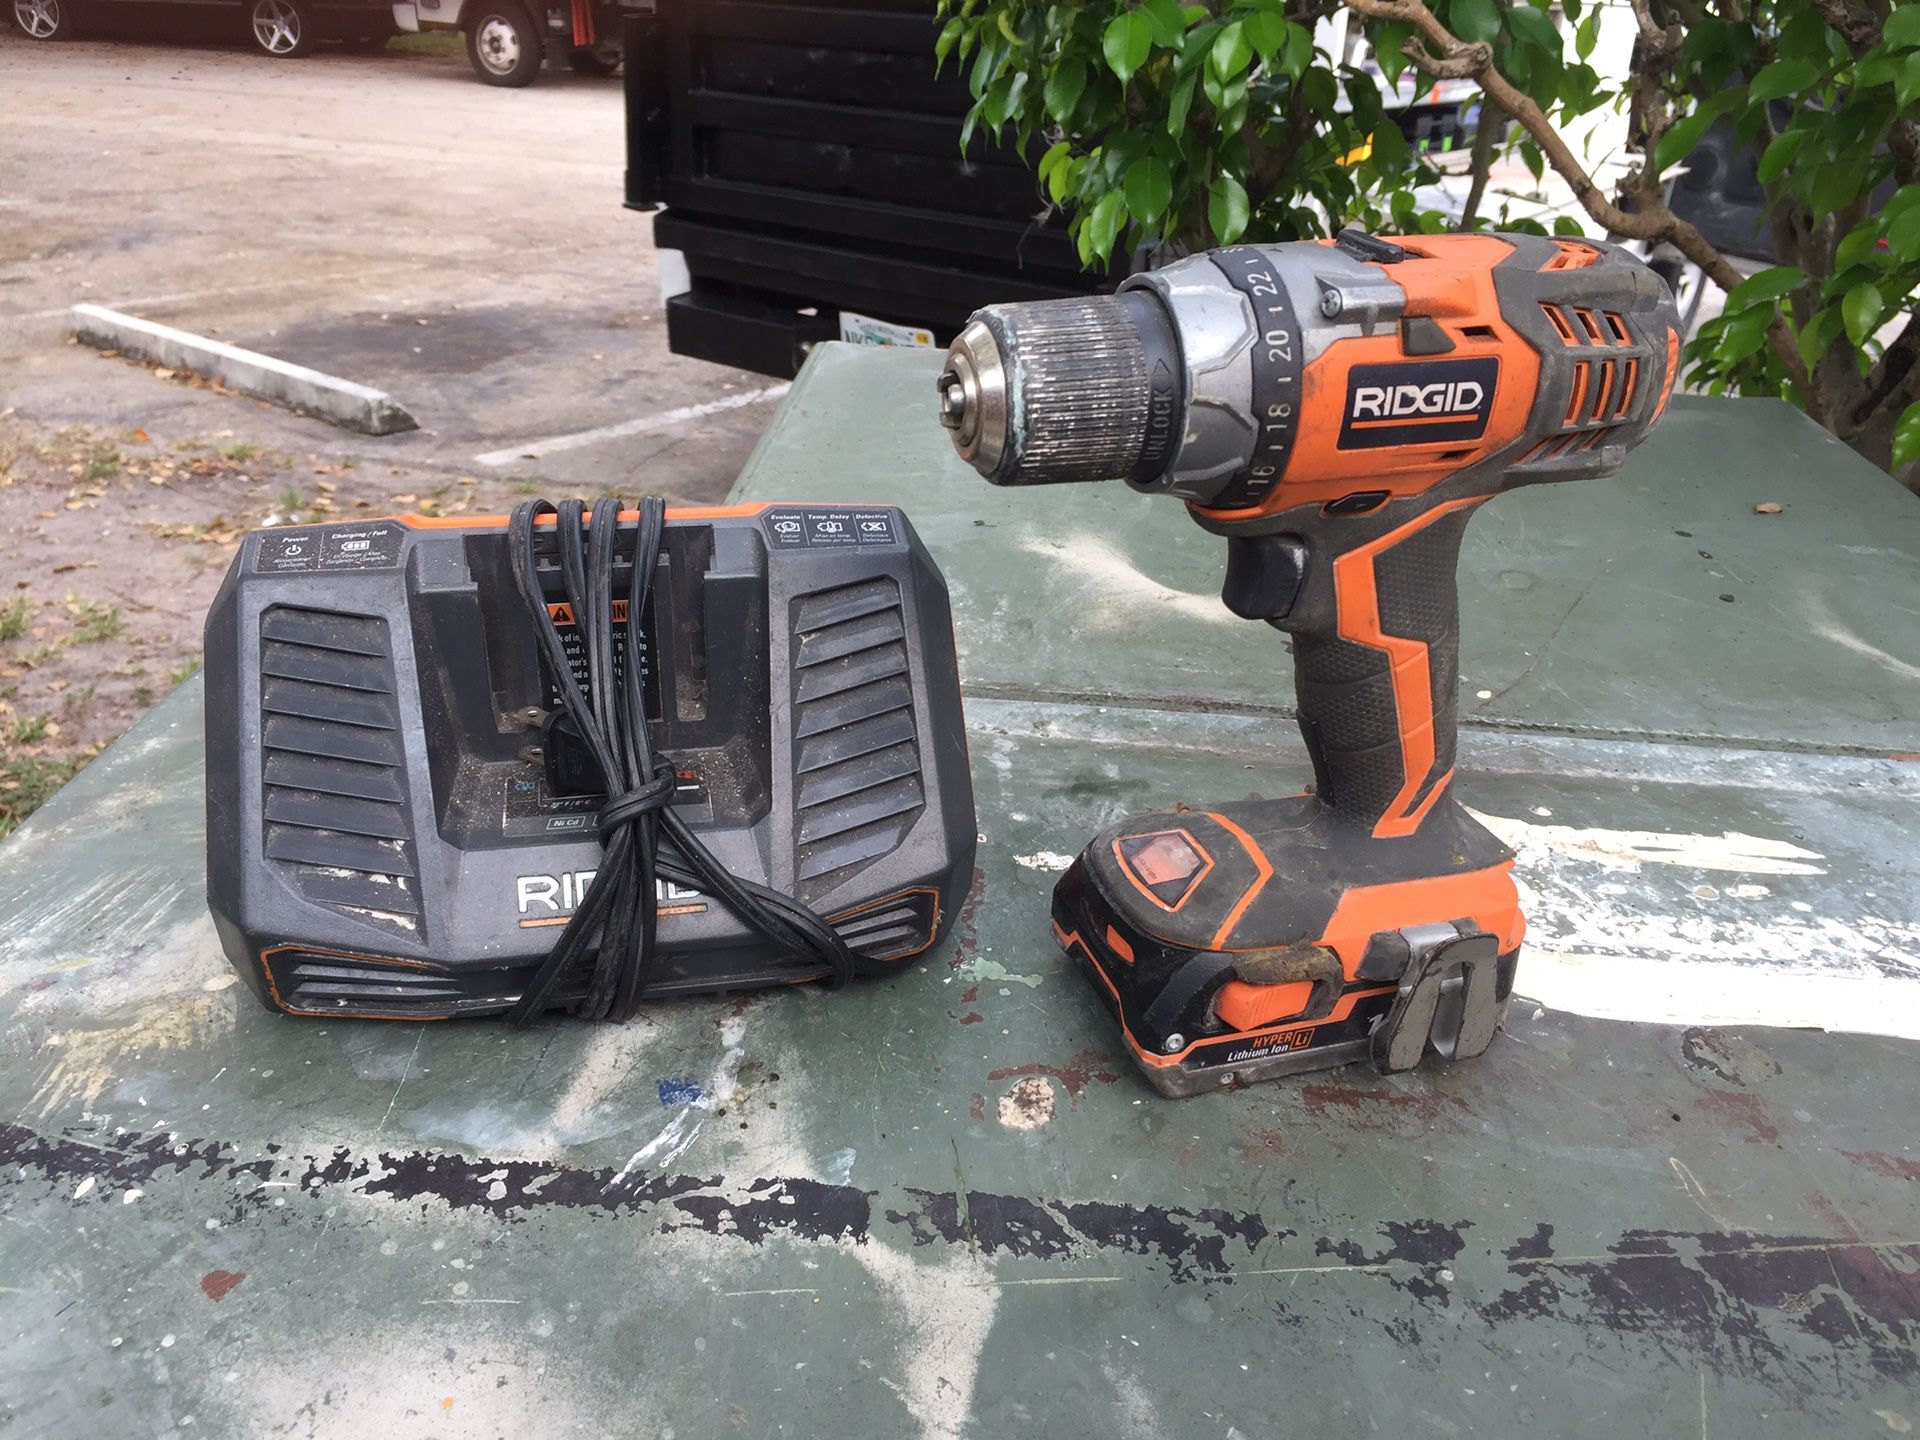 Rigid Drill w/battery and Rigid Battery Charger